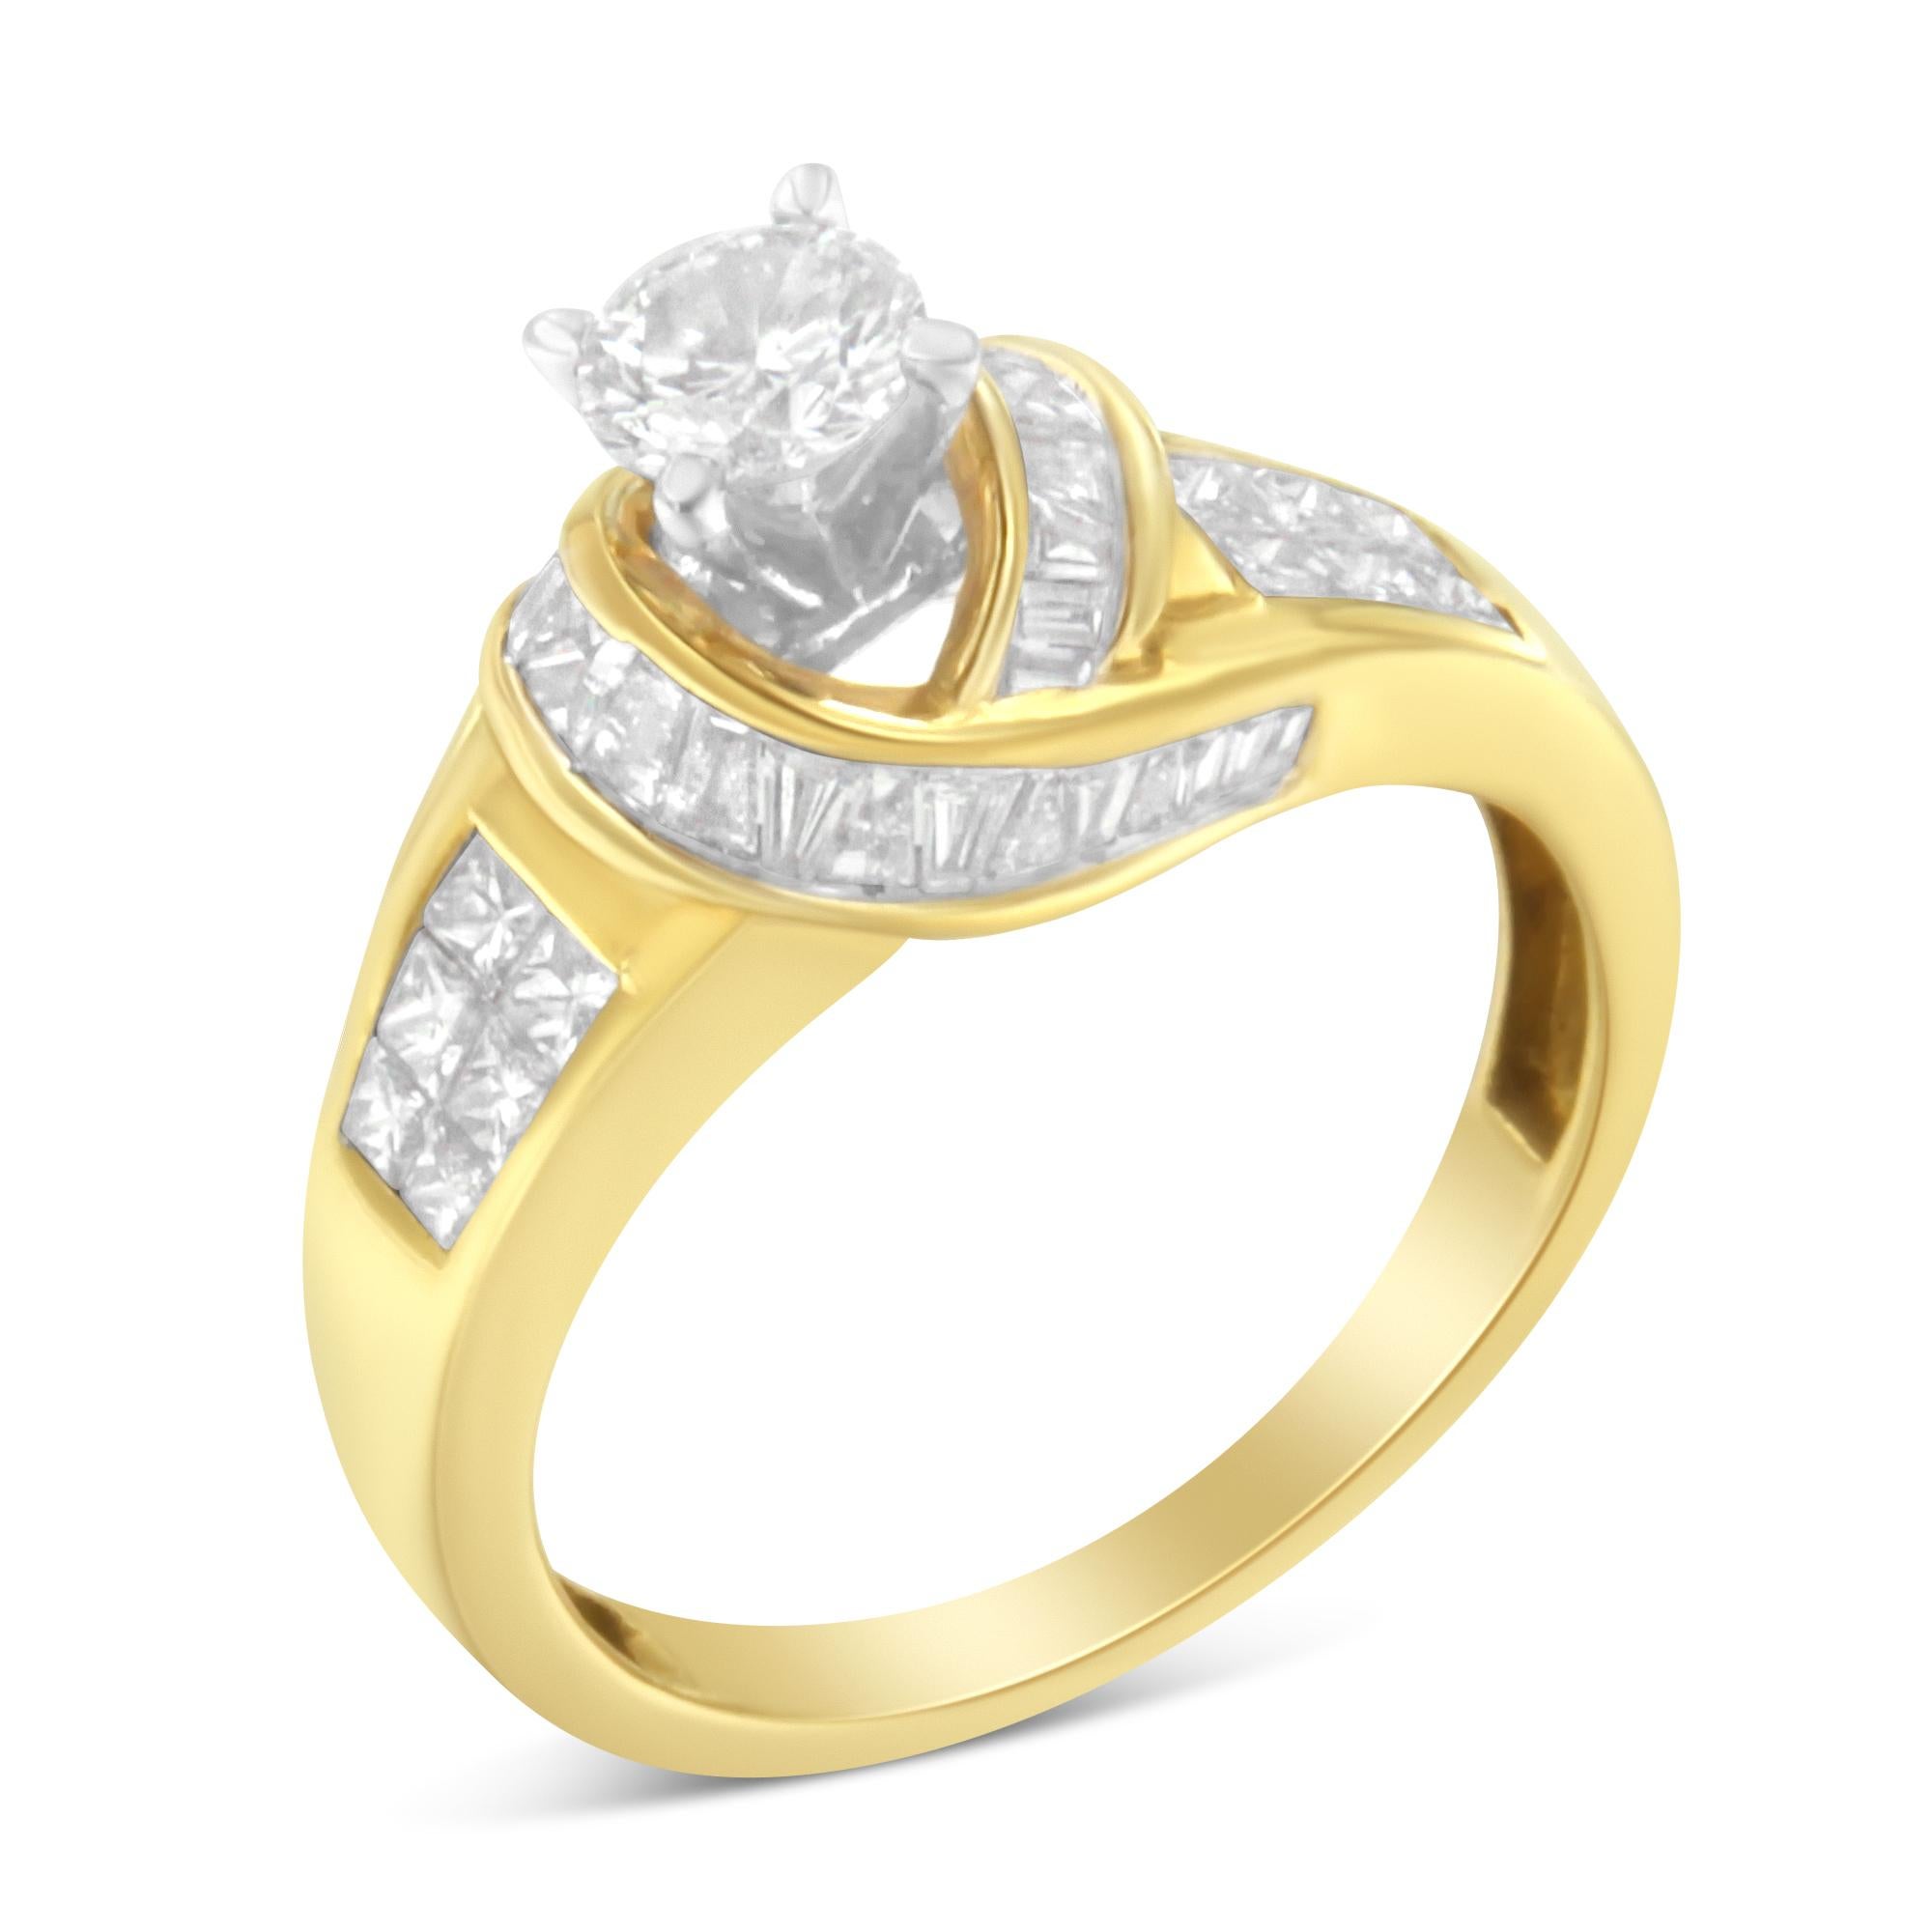 For Sale:  14K Two-Toned Gold 1 1/8 Carat Diamond Cocktail Ring 5